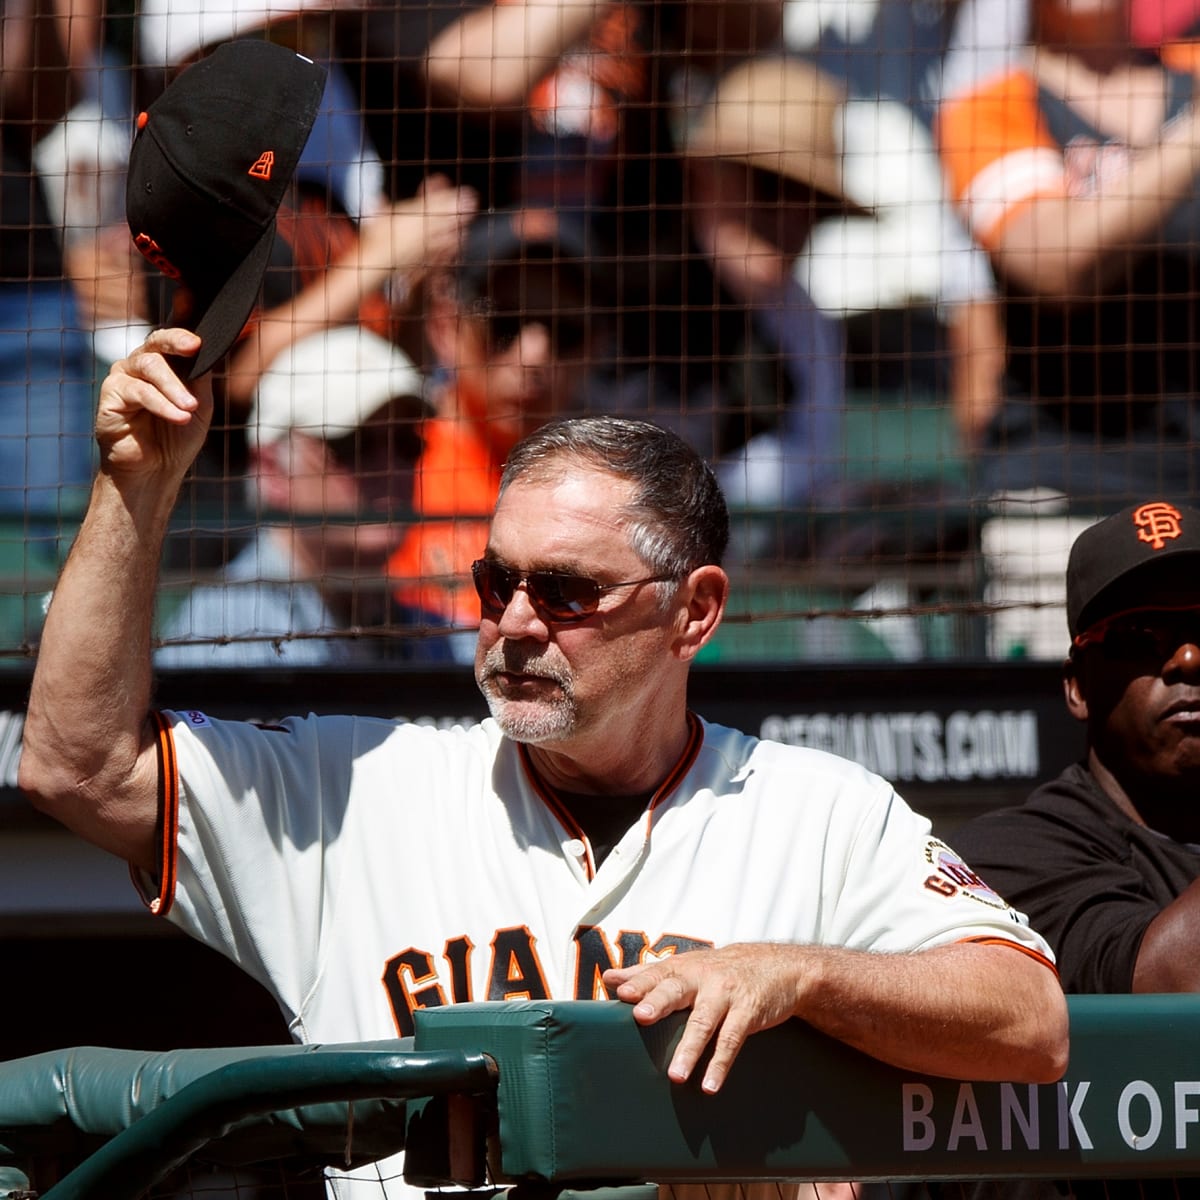 Bruce Bochy returning to Giants' ballpark and what's likely to be a loving  reception